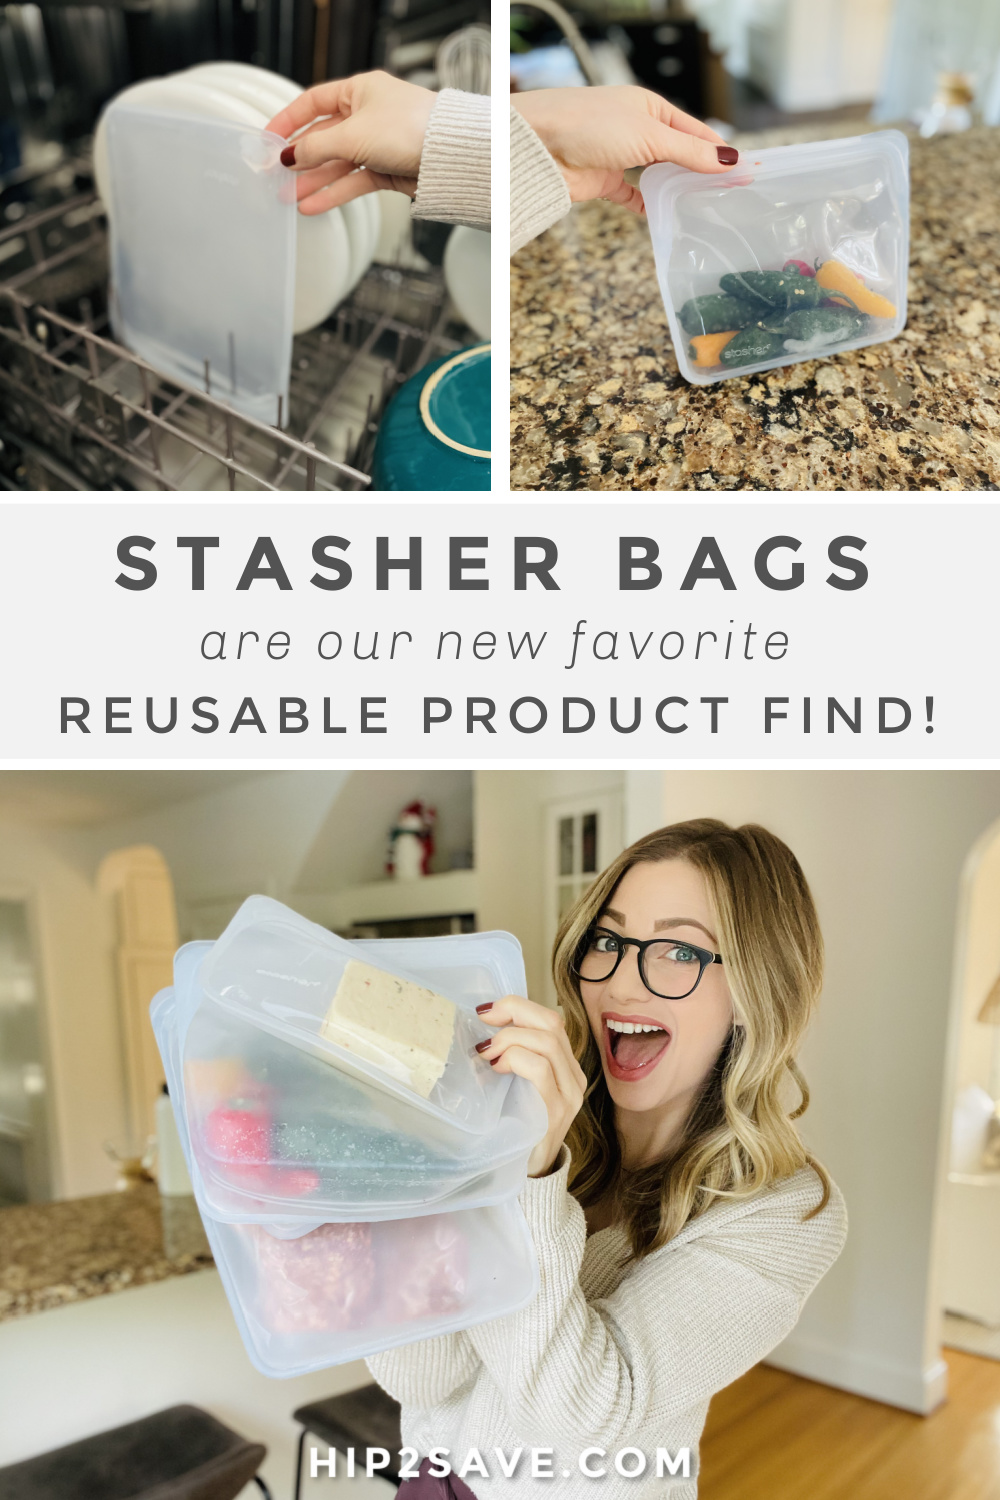 Stasher Bag Review: Are They Worth It? - The Produce Nerd